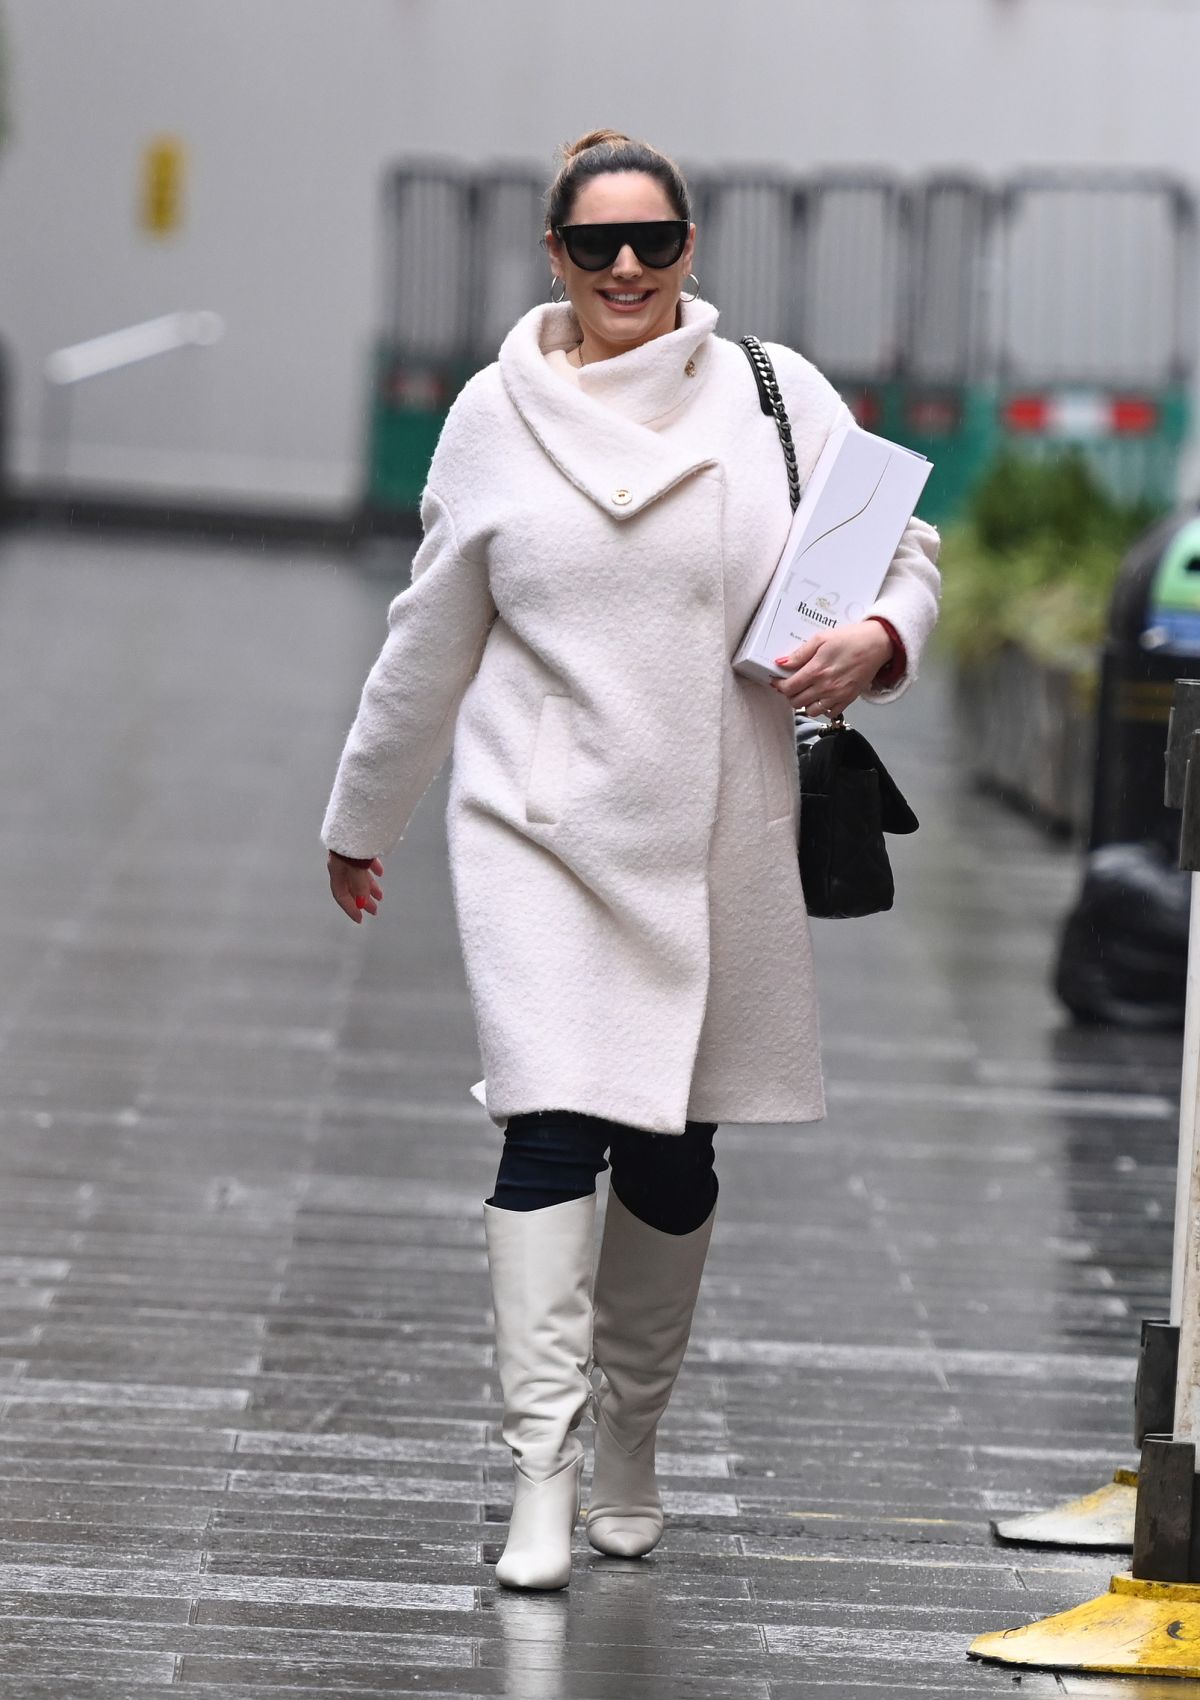 179310308_kelly-brook-in-a-white-coat-and-boots-at-global-radio-in-london-12-23-2020-12.jpg